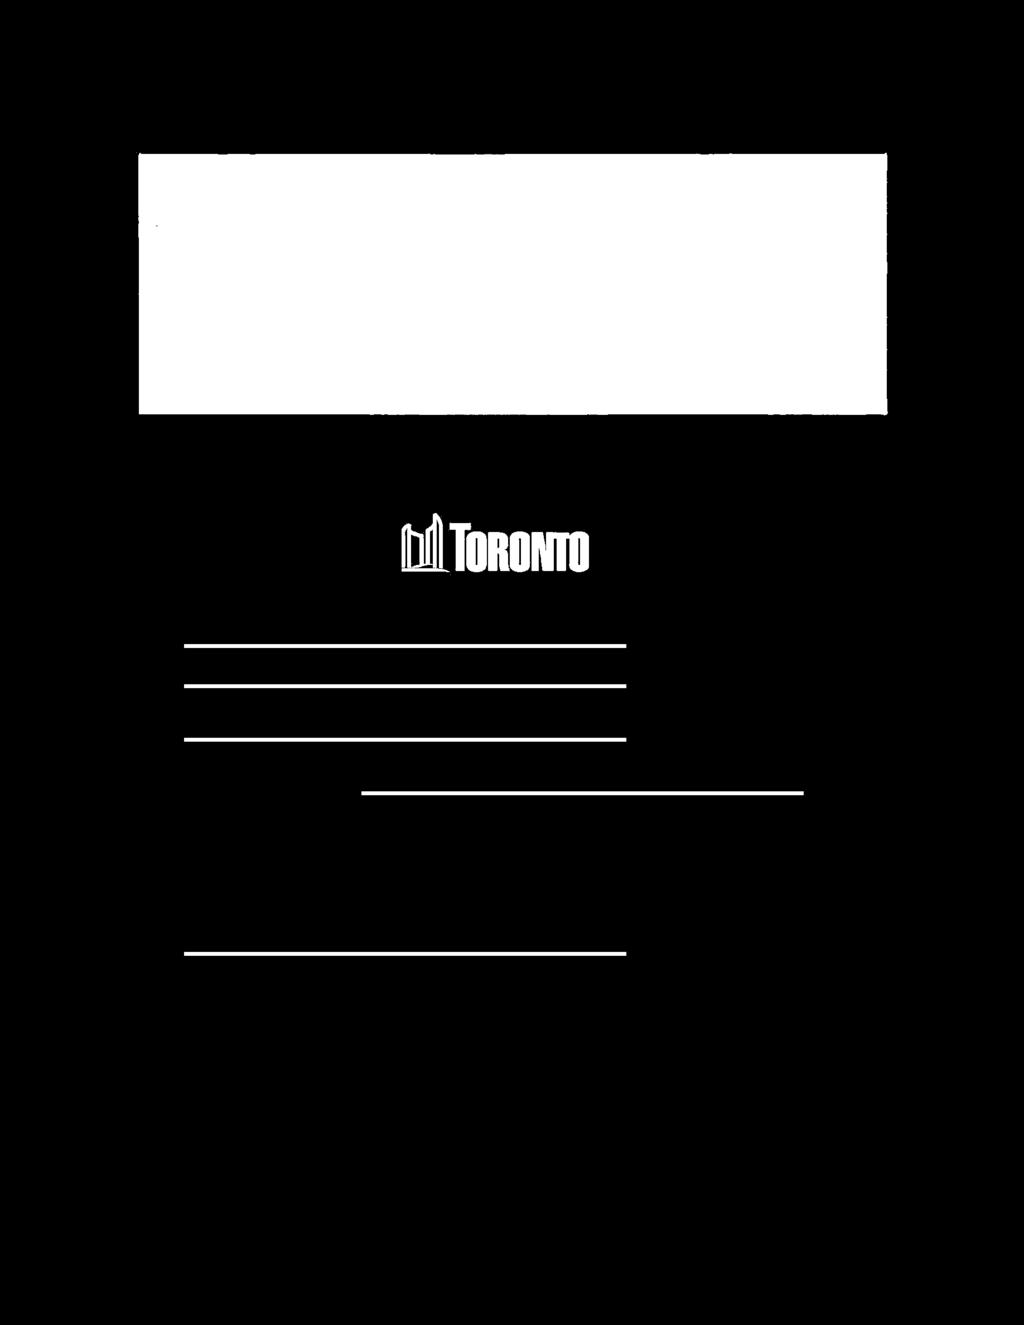 Toronto Poverty Reduction Strategy (2015-2035) Community Conversation Guide Location: Date: Time: Number of Participants: Please let us know if a Community Animator supported this event.